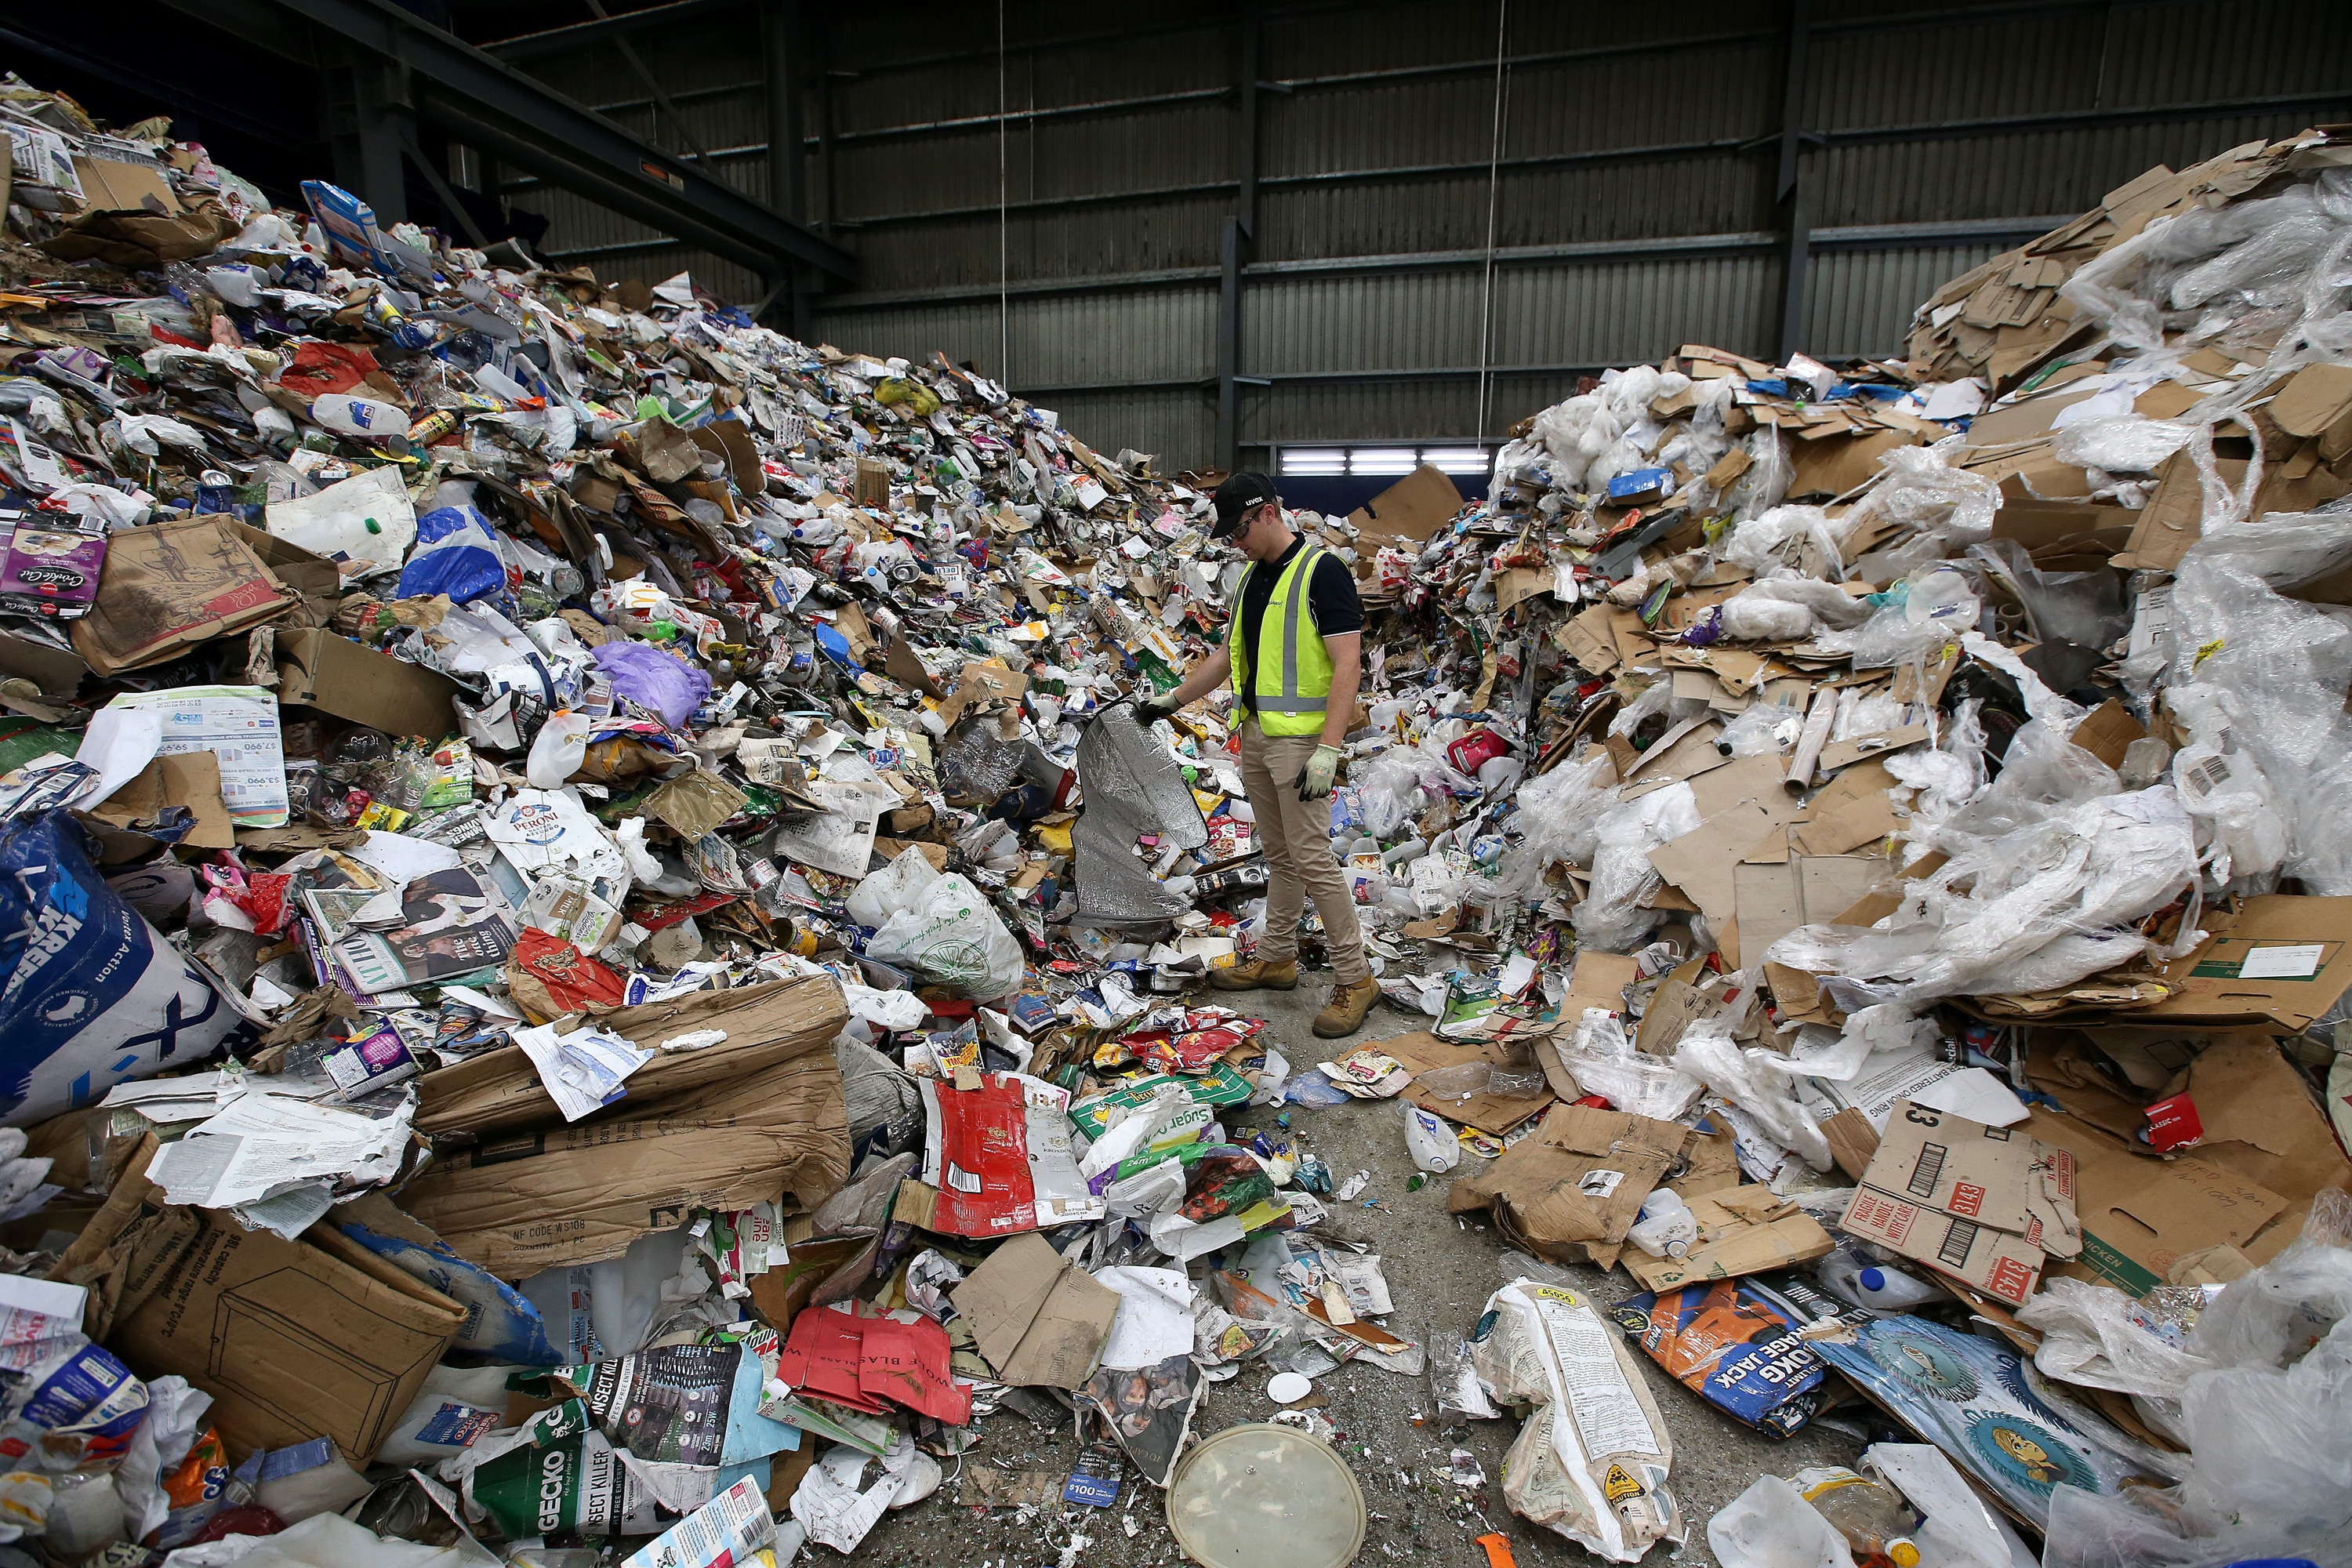 Australia generated 75.8 million tonnes of solid waste in 2018-19.